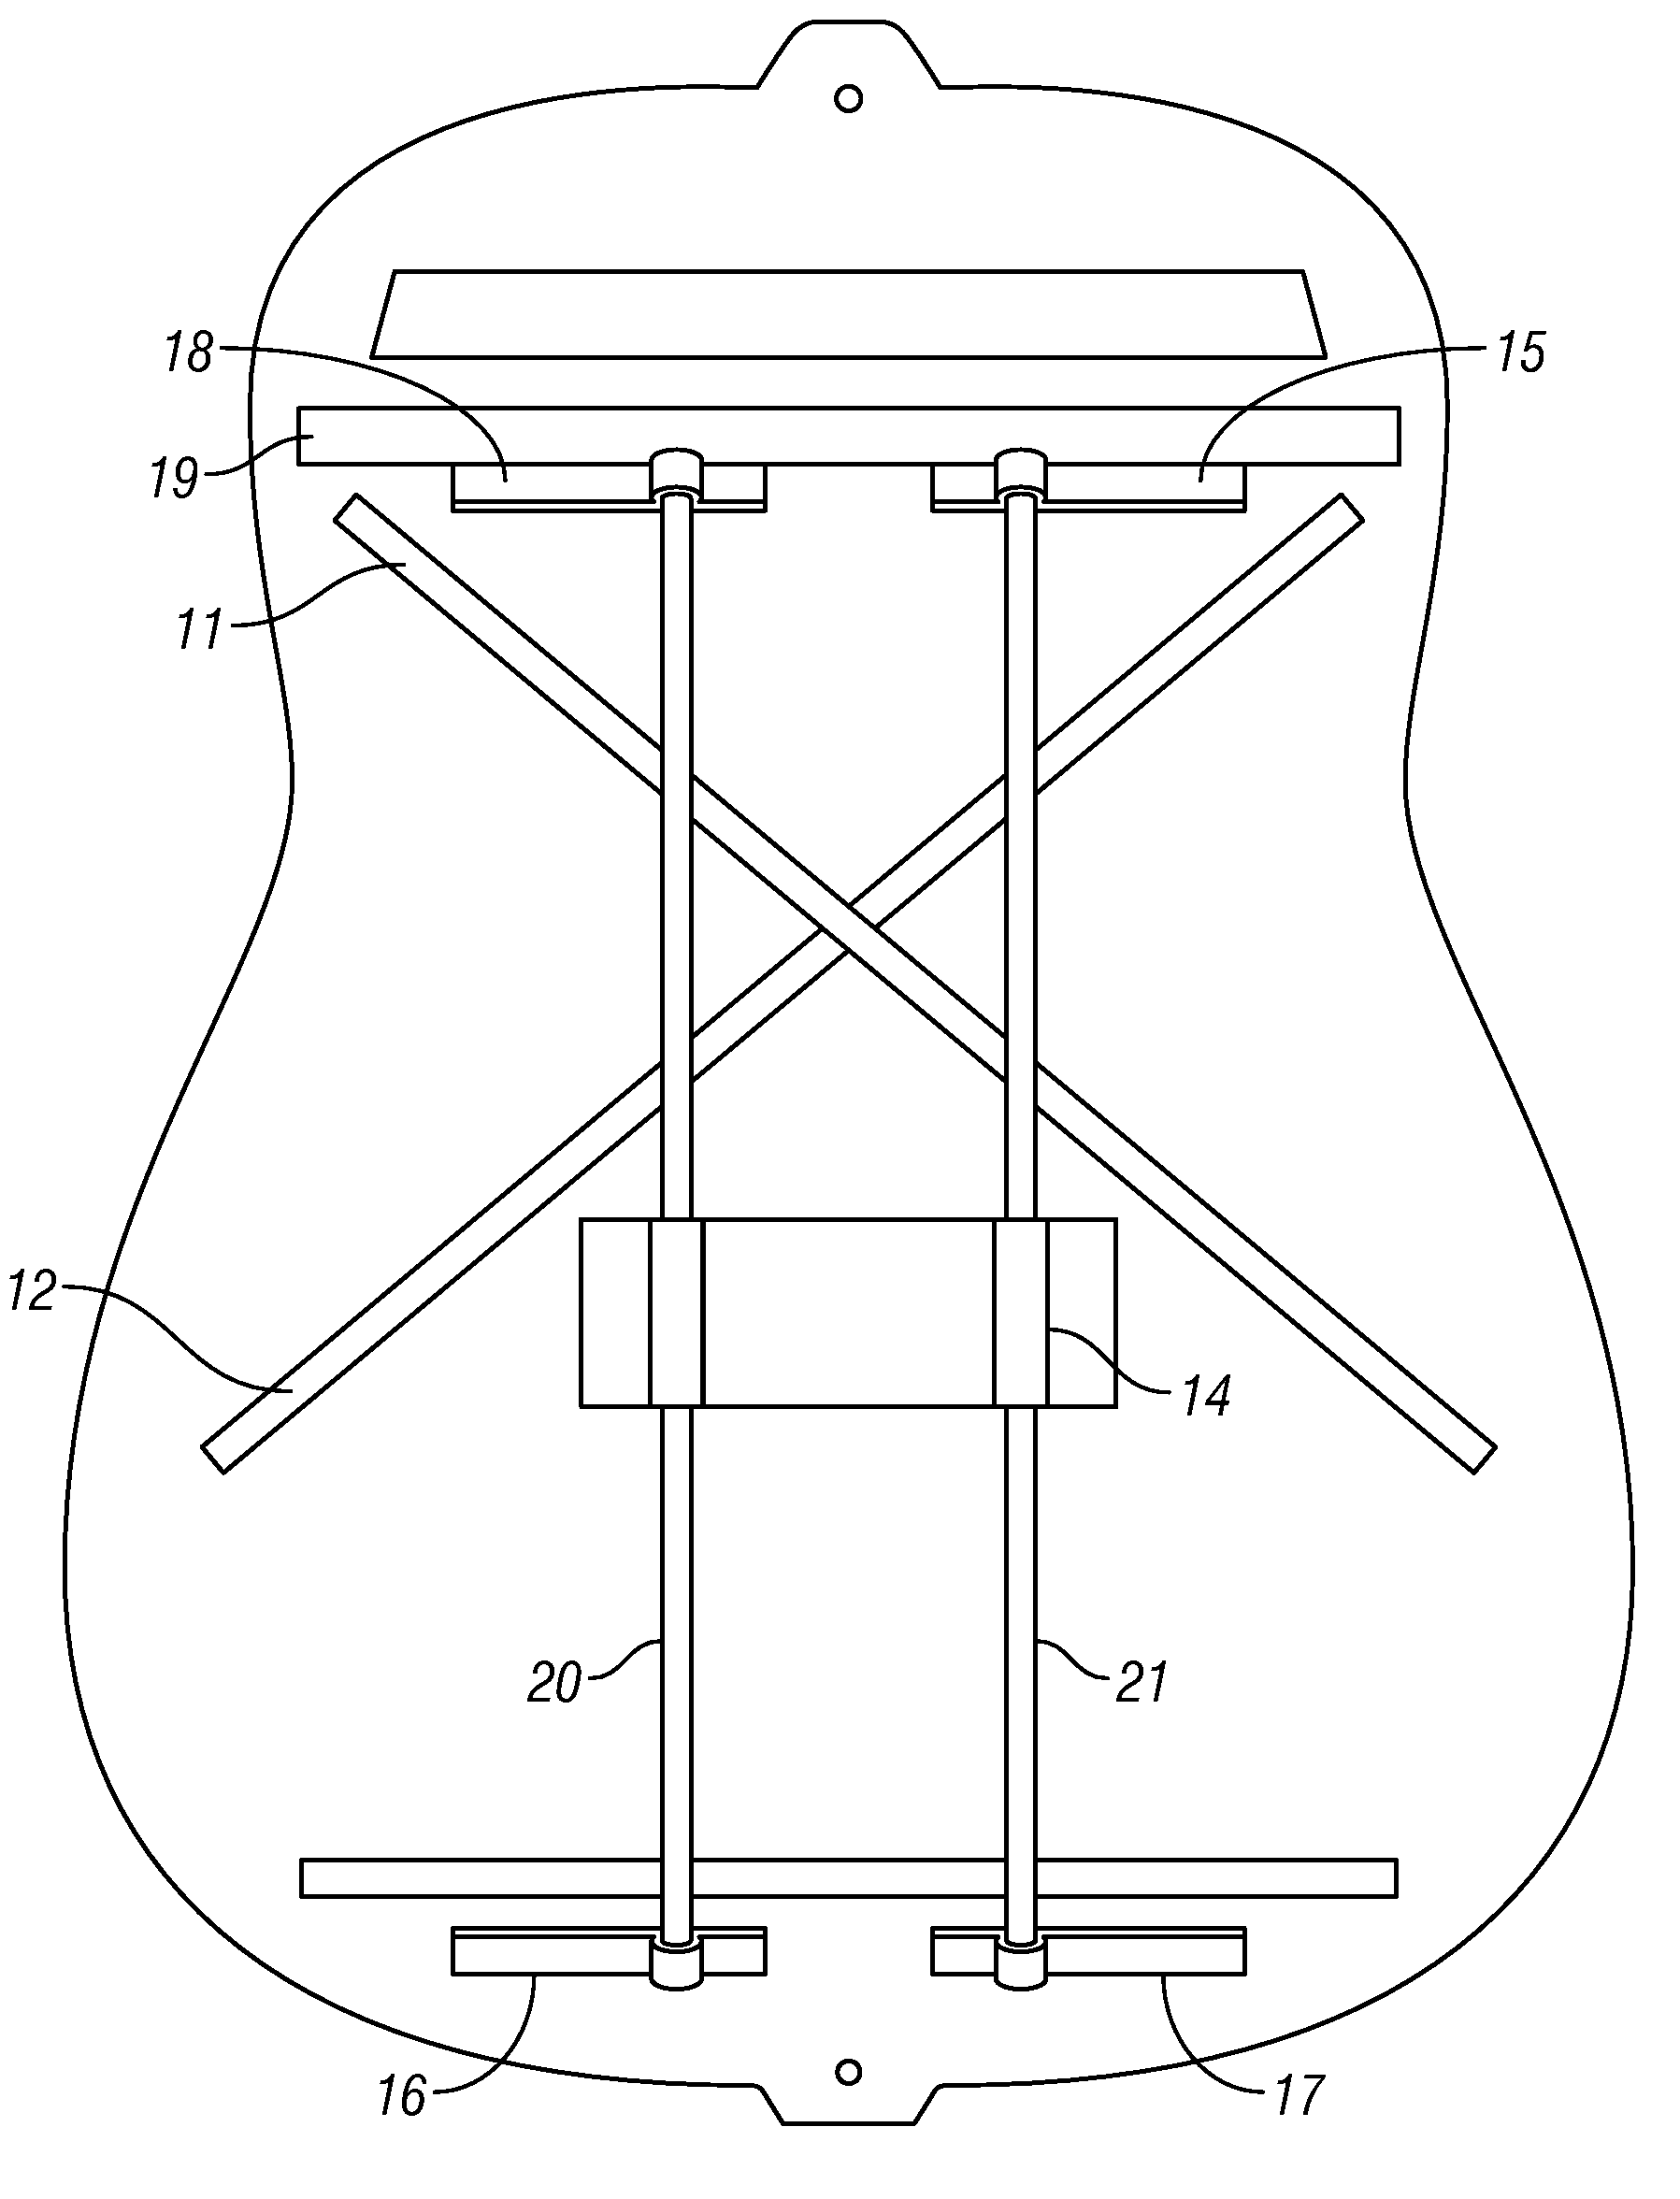 Suspended Bracing System for Acoustic Musical Instruments